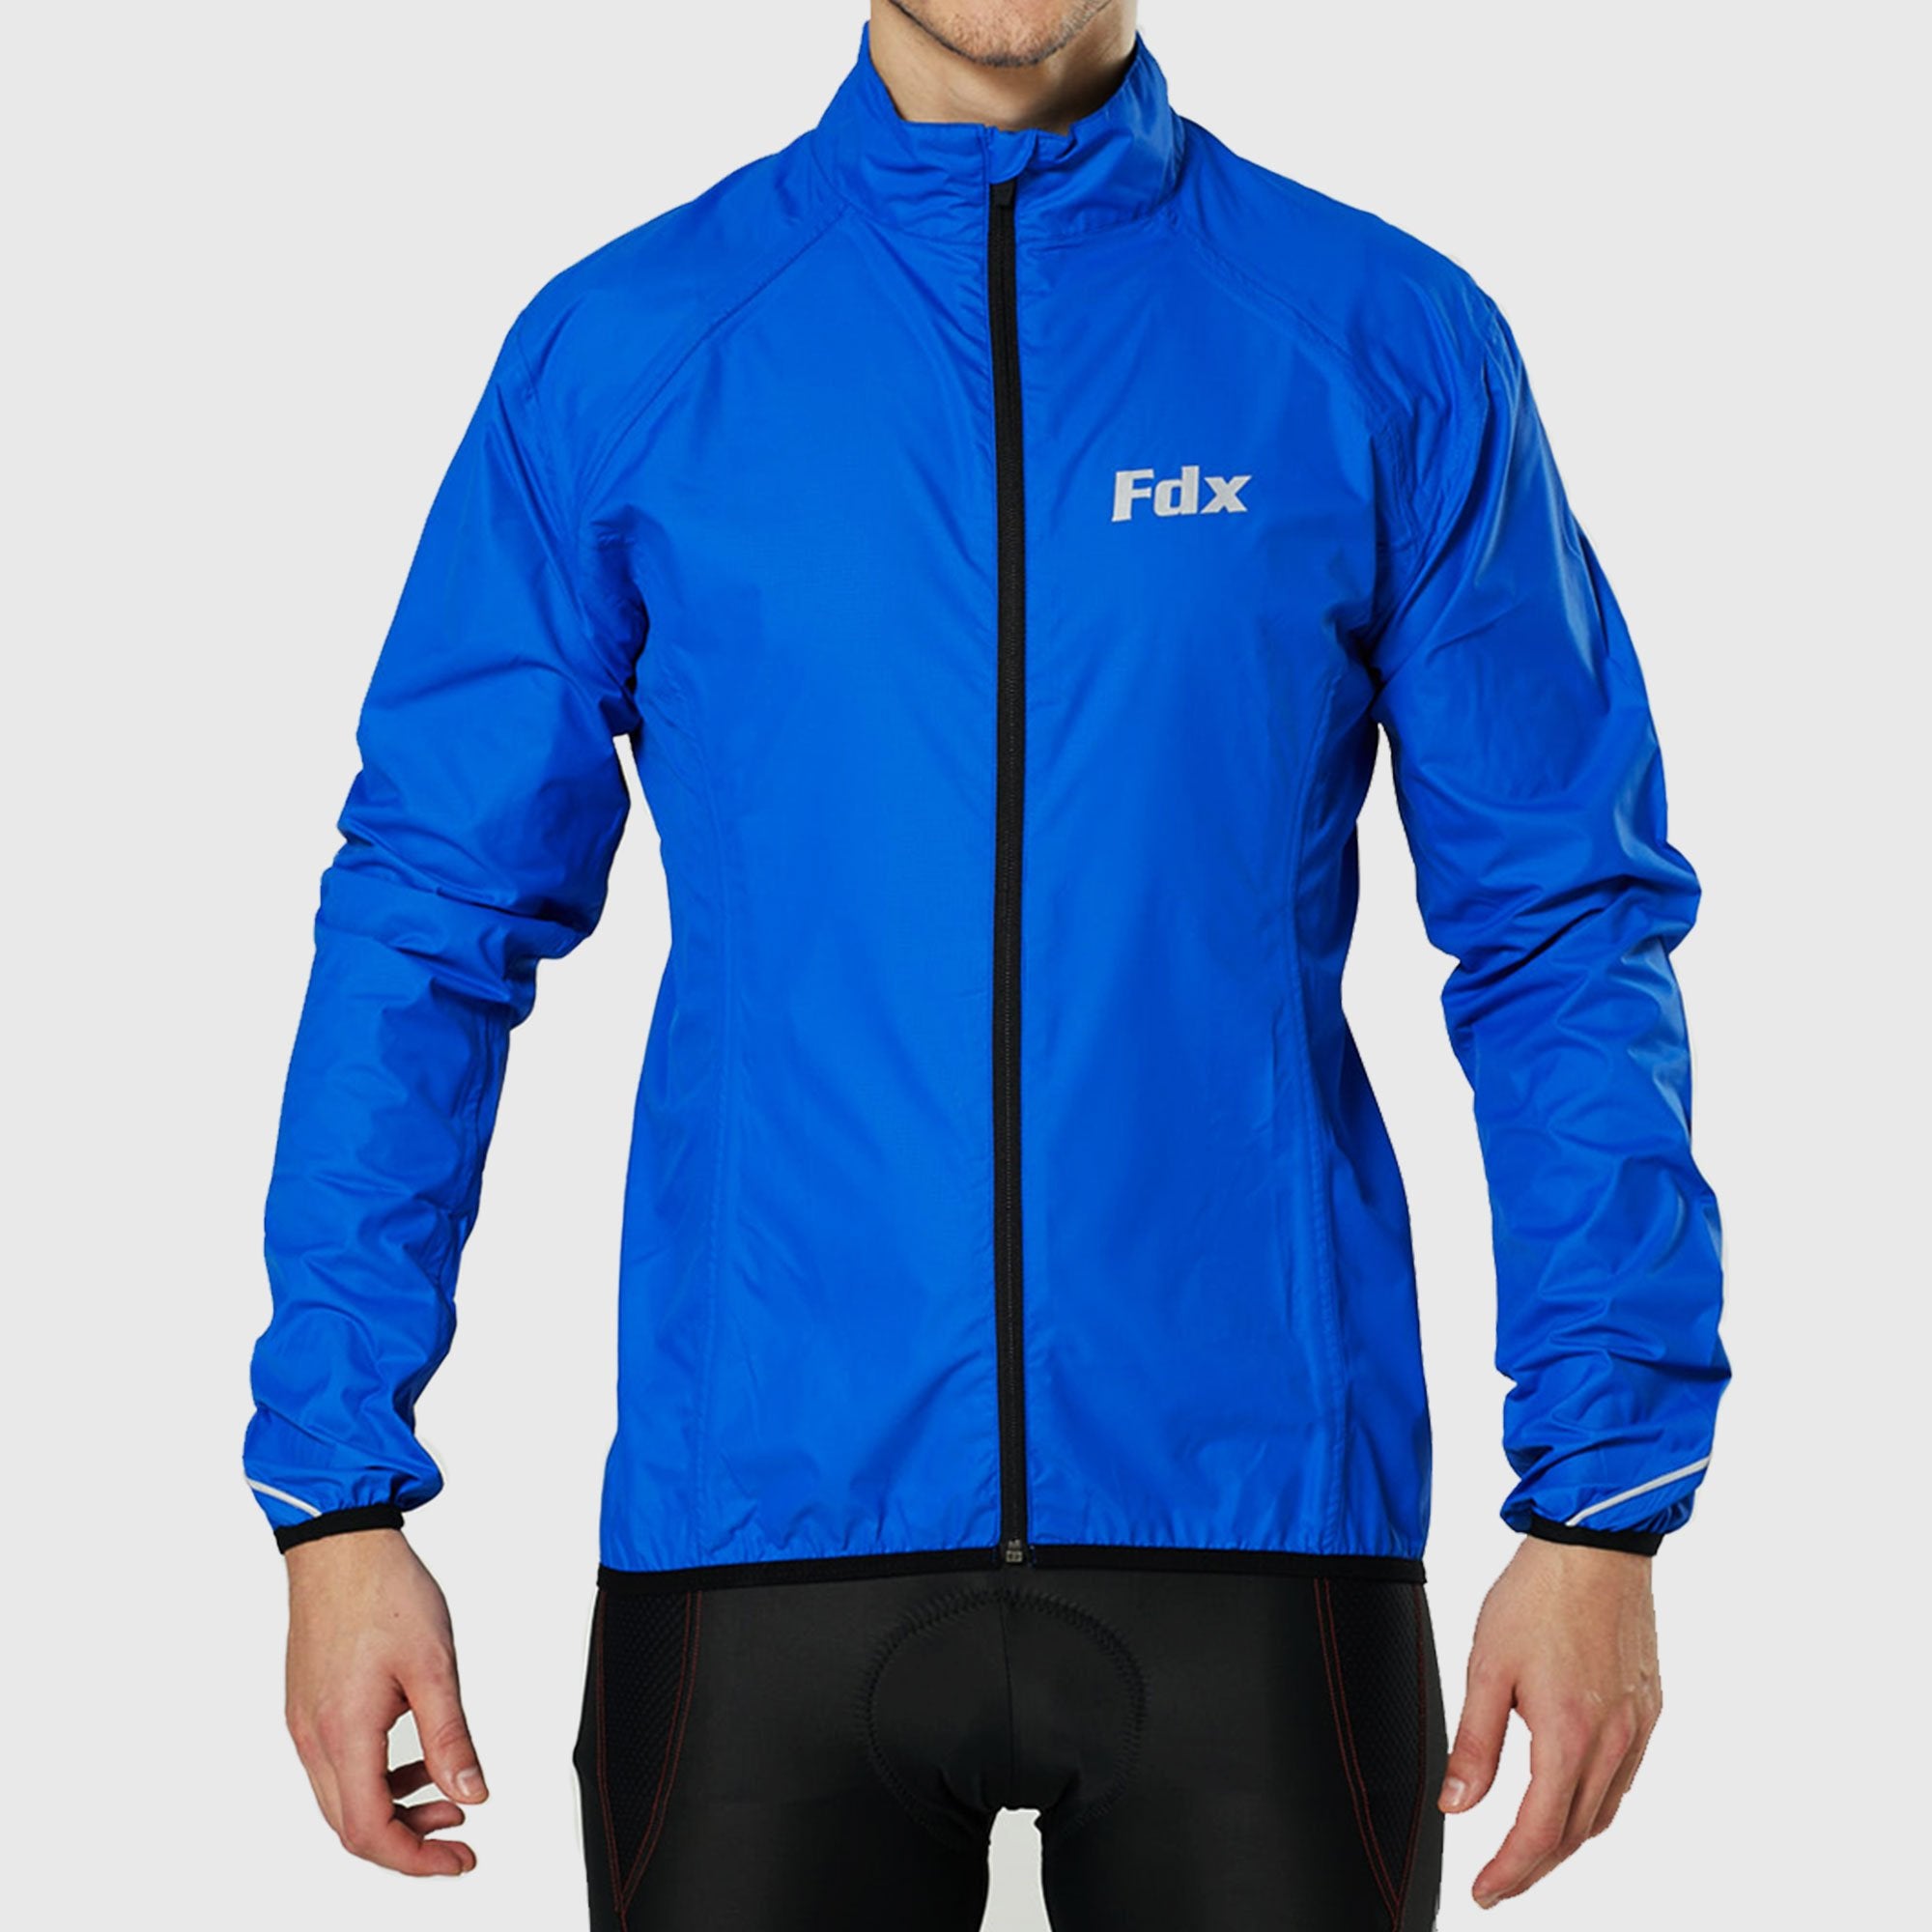 Fdx Men's Blue Best Cycling Jacket for Winter Thermal Casual Softshell Clothing Lightweight, Shaver proof, Packable ,Windproof, Waterproof & Pockets